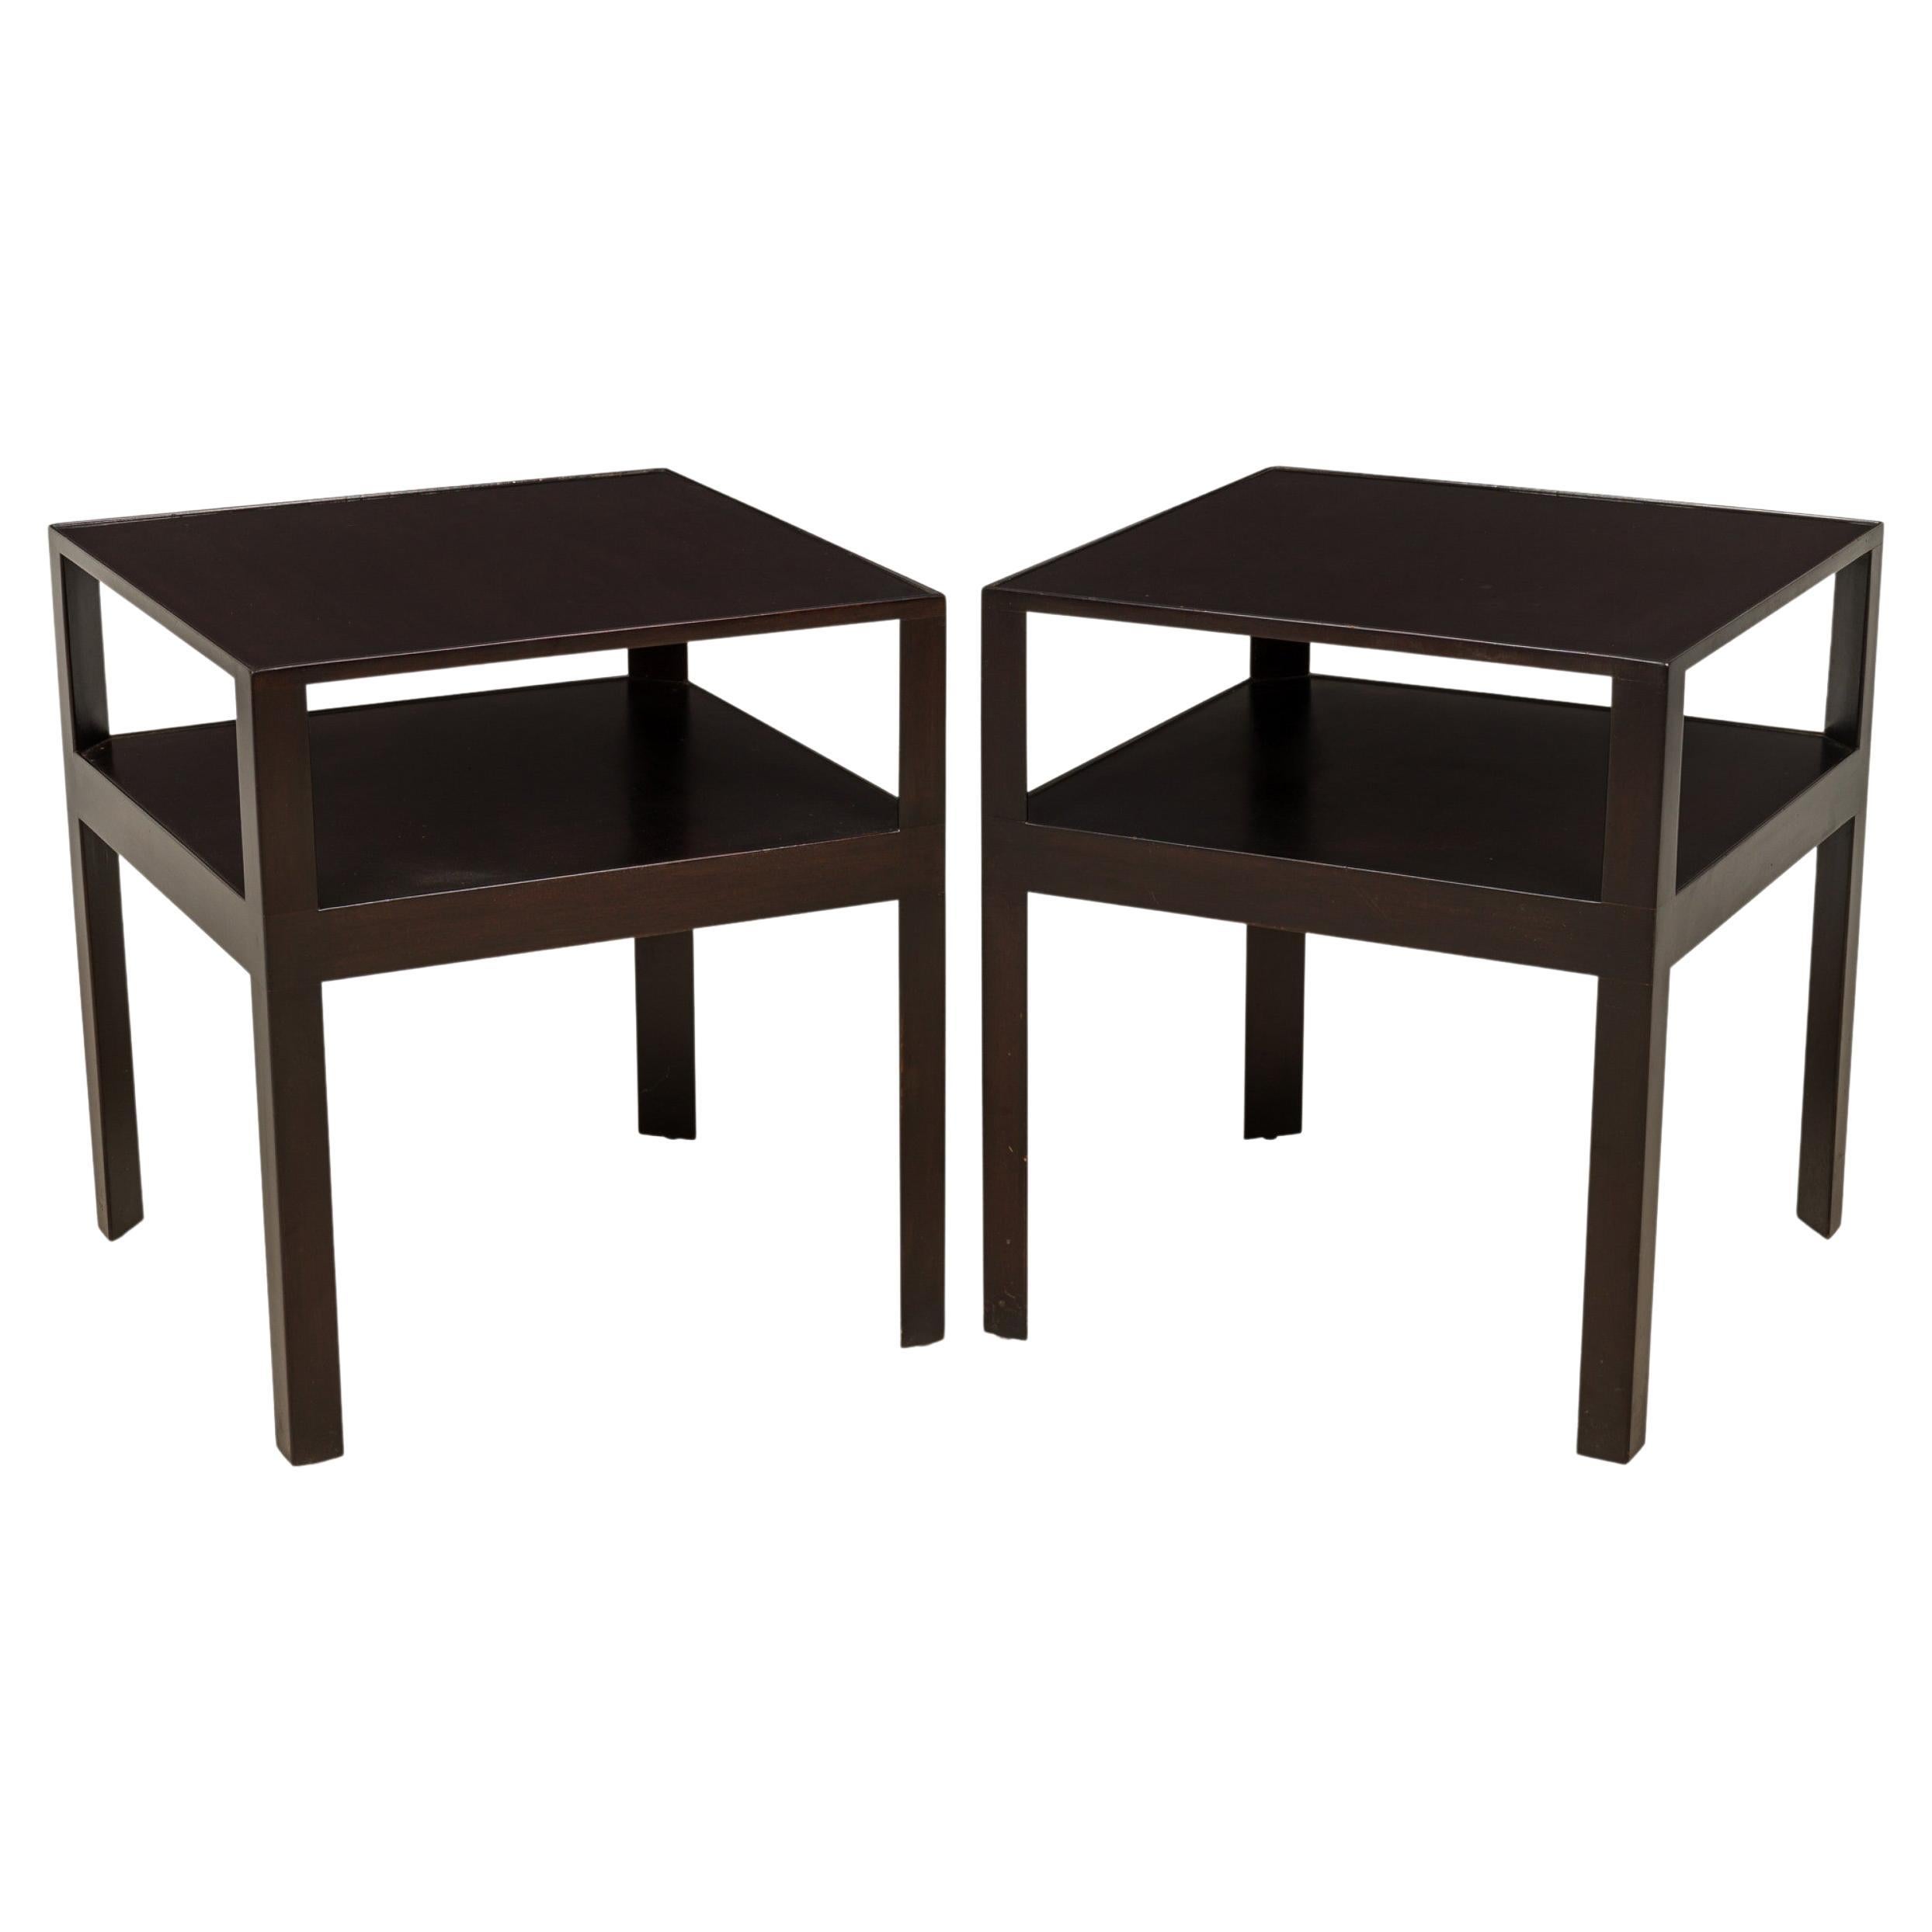 Pair of Edward Wormley Lacquered Dark Wood Two Shelf End / Side Tables For Sale